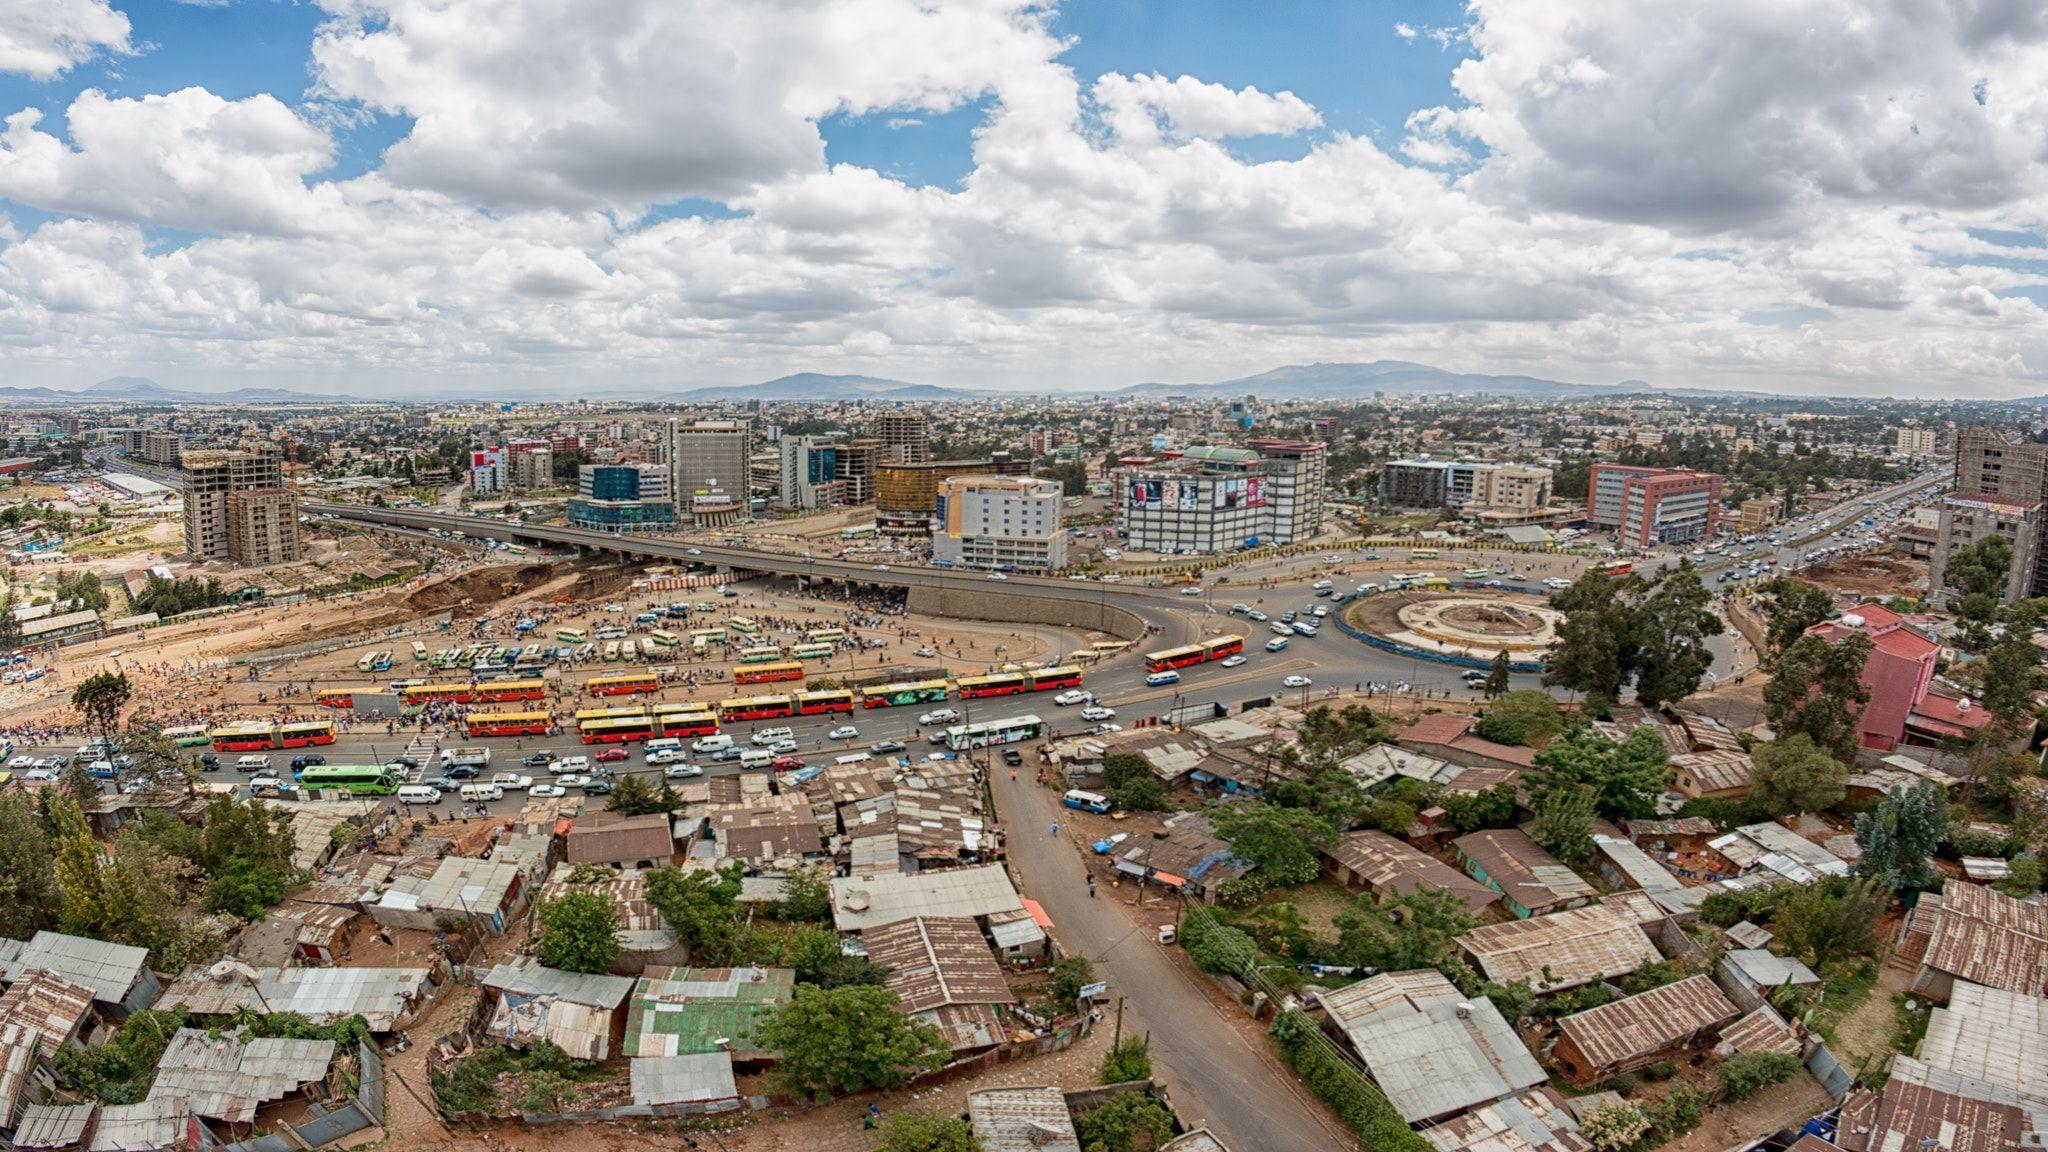 View of Addis Ababa sky with mixed clouds over the city